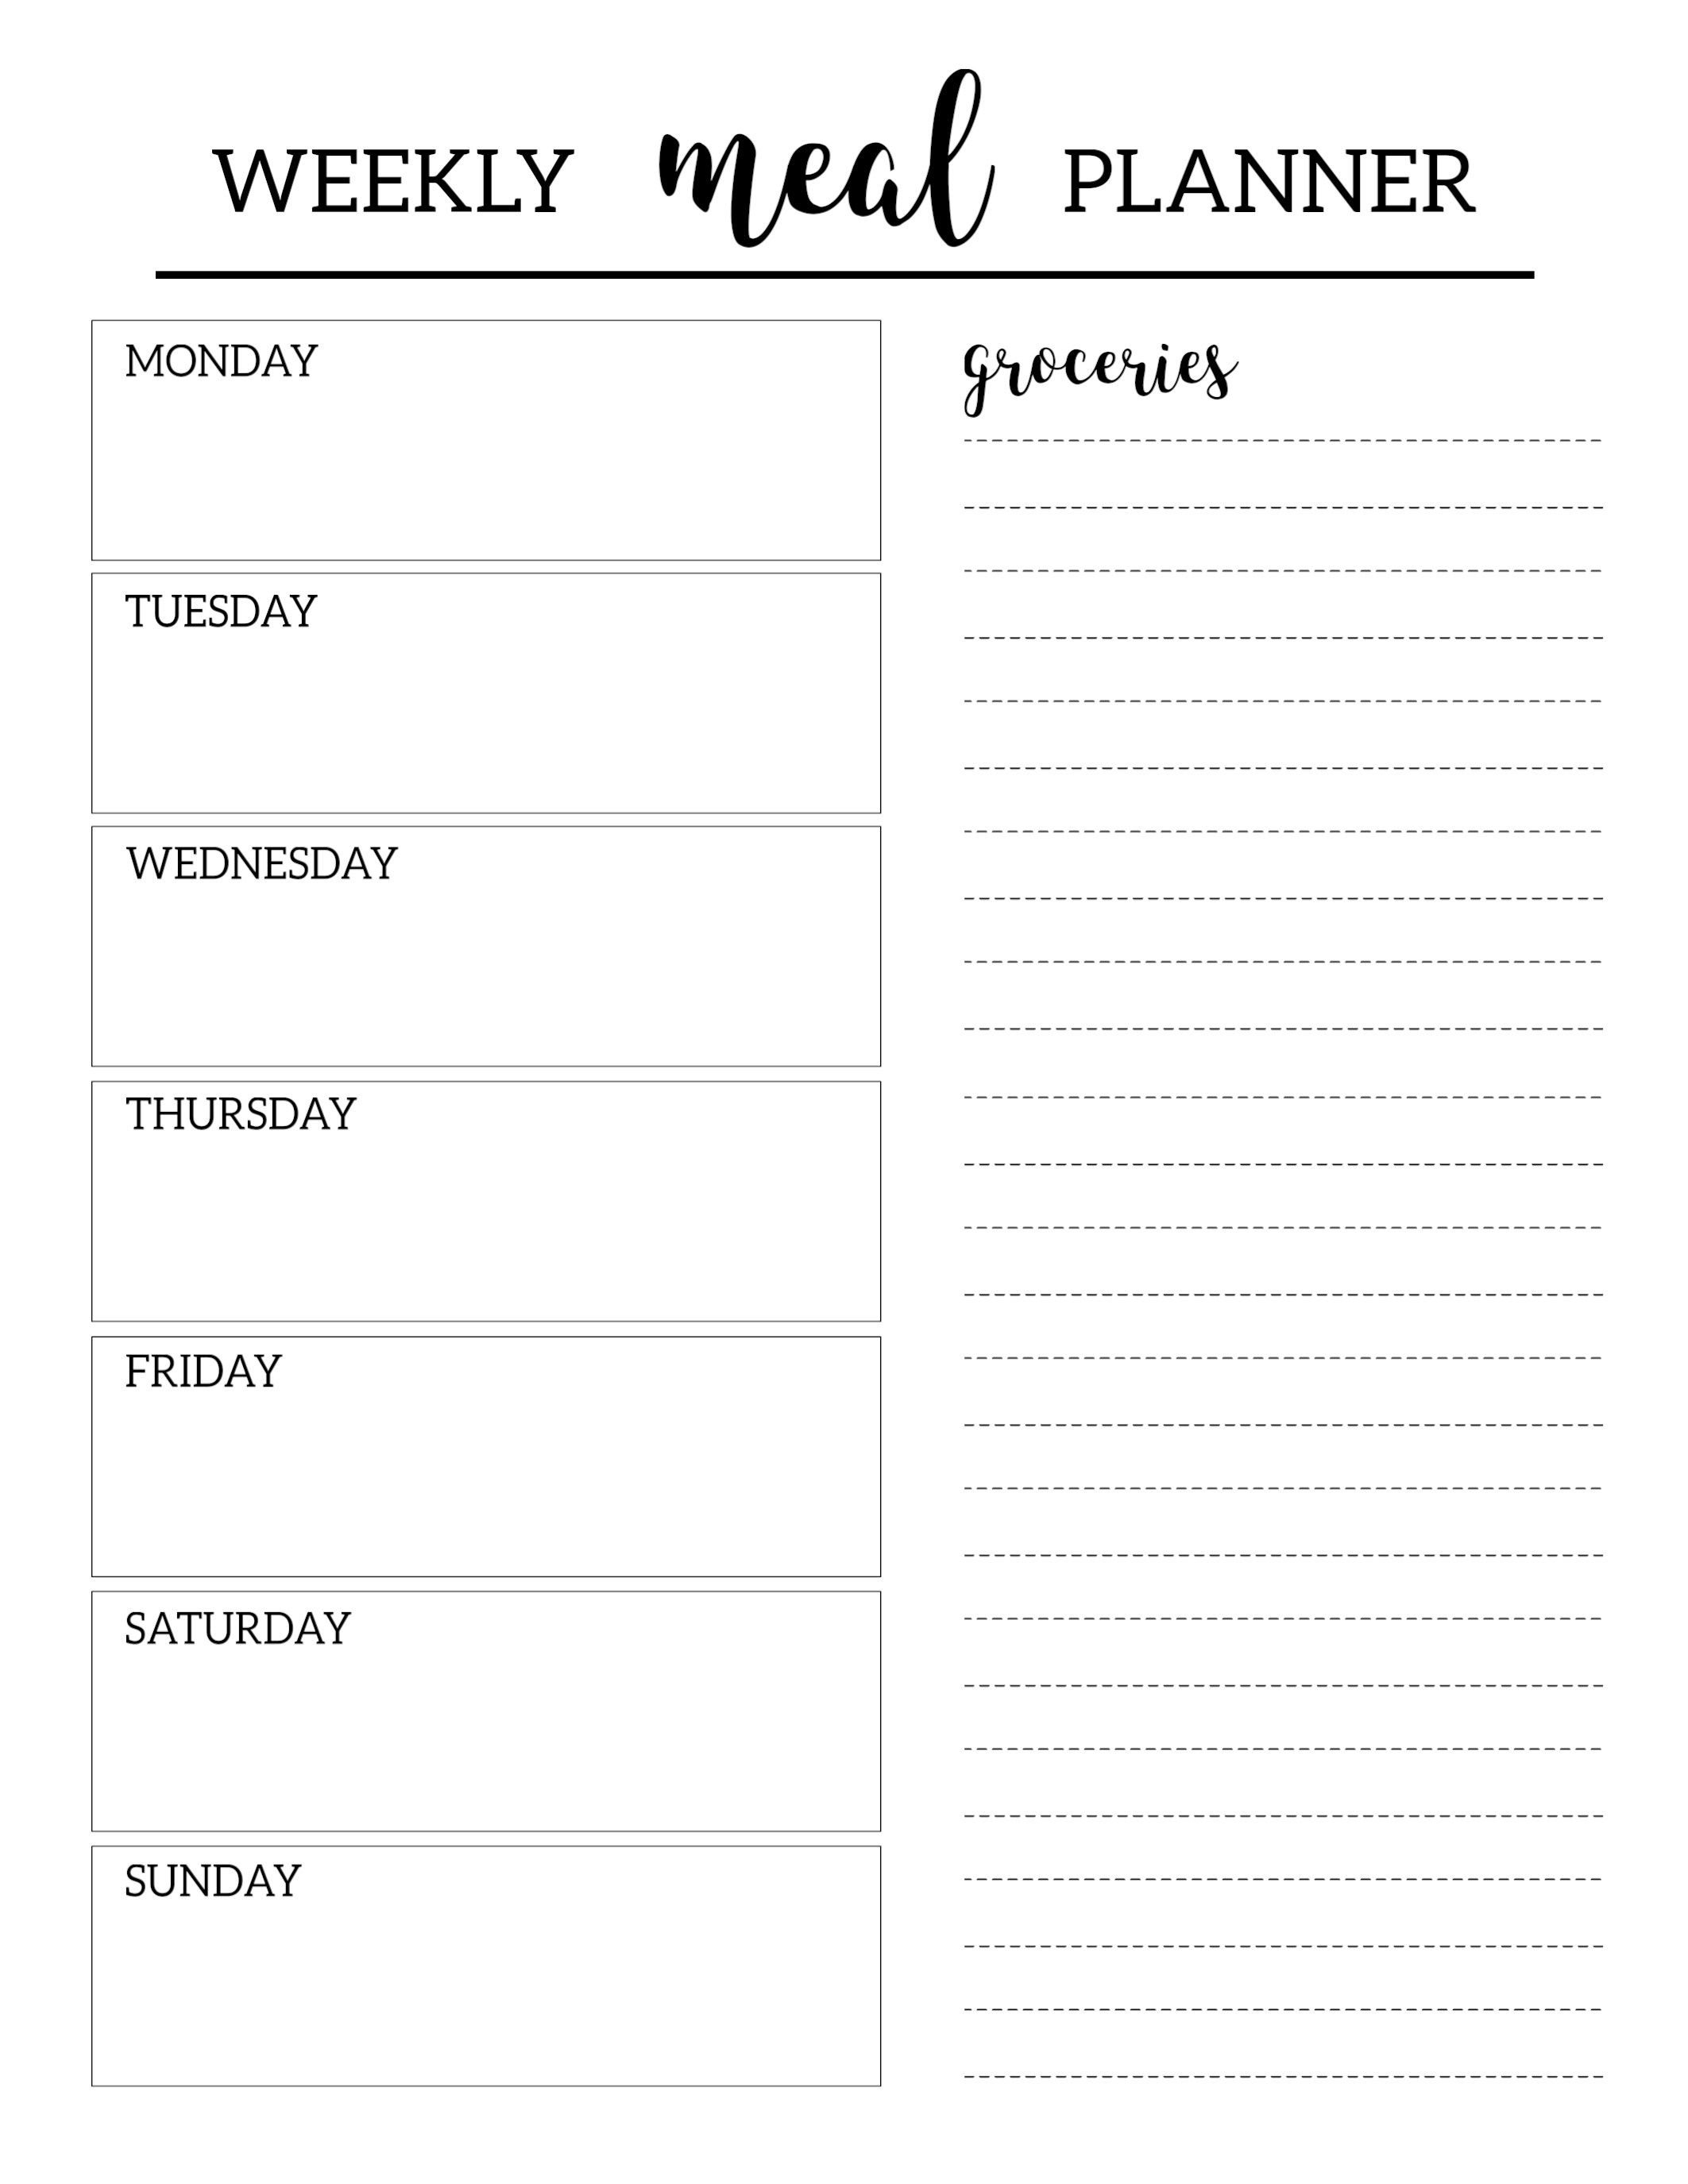 Free Printable Meal Planner Template | Organization | Pinterest - Free Printable Menu Planner